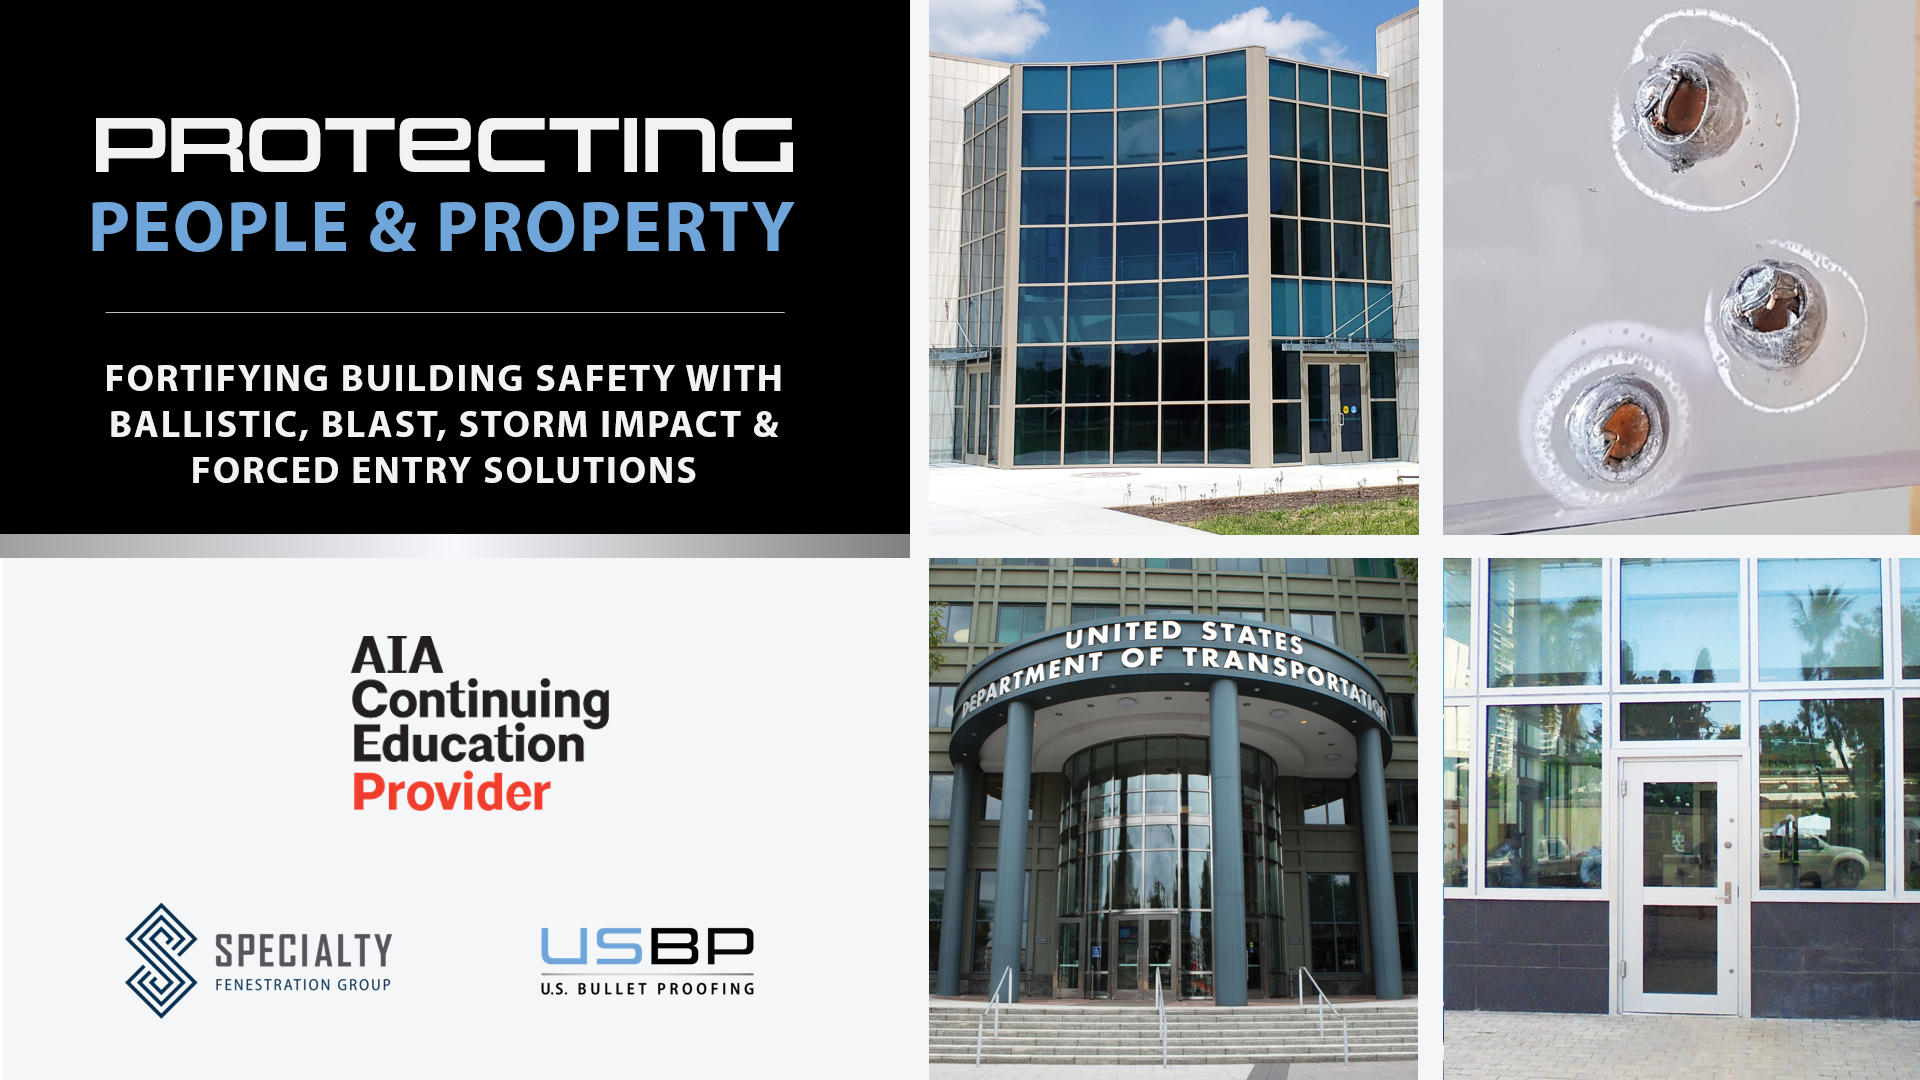 In-Person Lunch & Learn – RB&A: Fort Worth, TX – CEU Course: Protecting People & Property